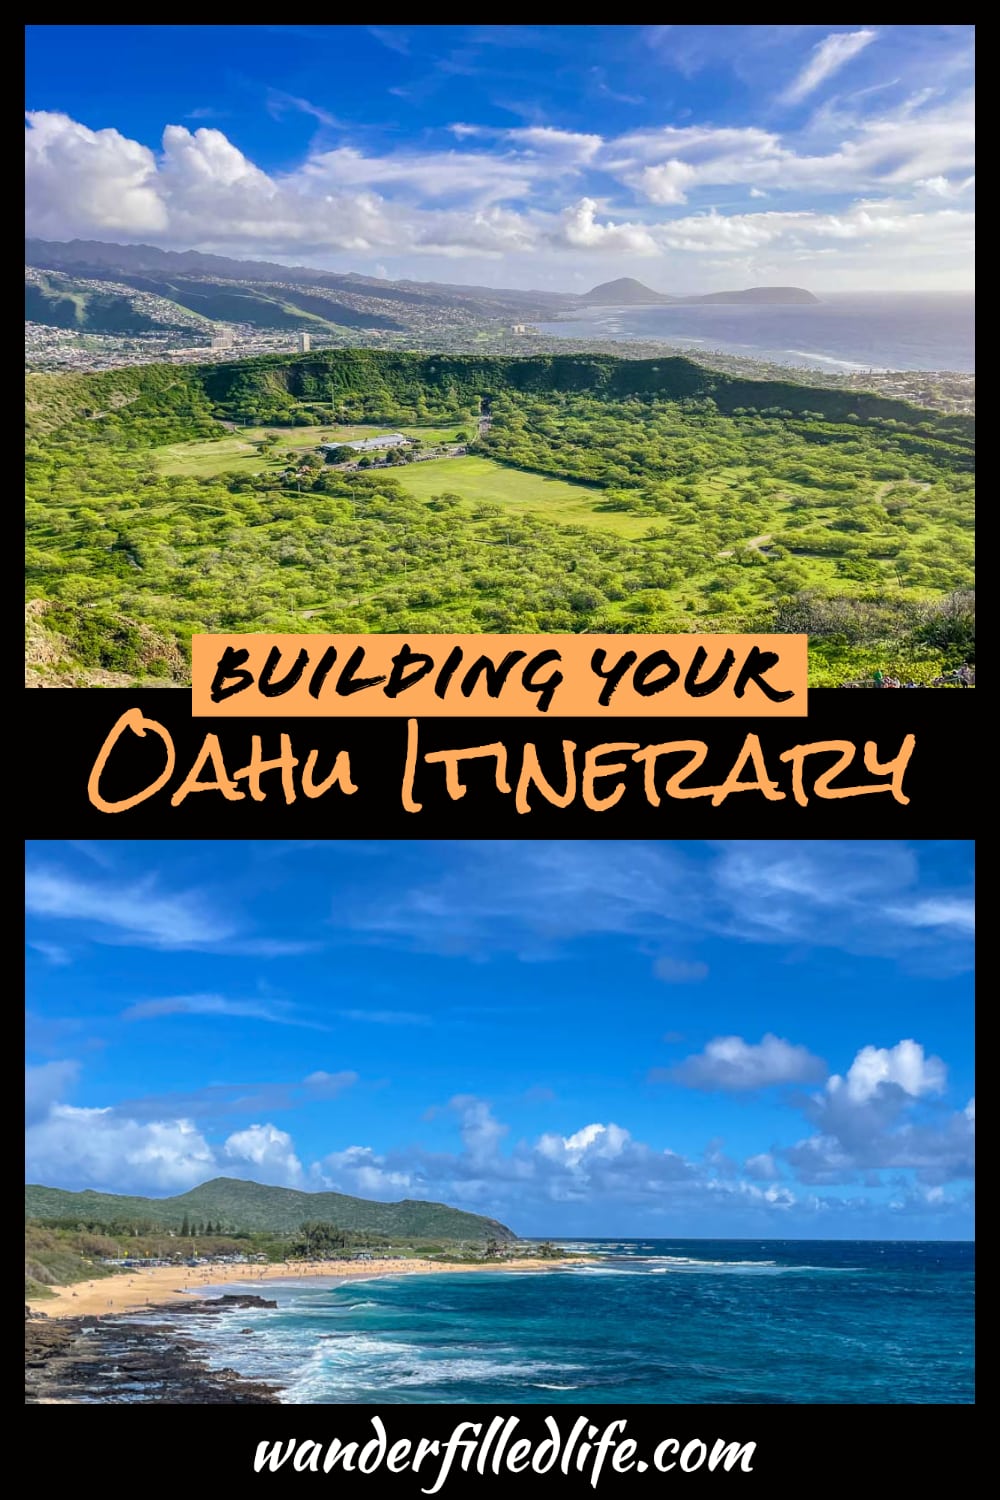 Need help planning your Oahu itinerary? We've got suggestions for how to spend your time, whether you have a single day or a full week.